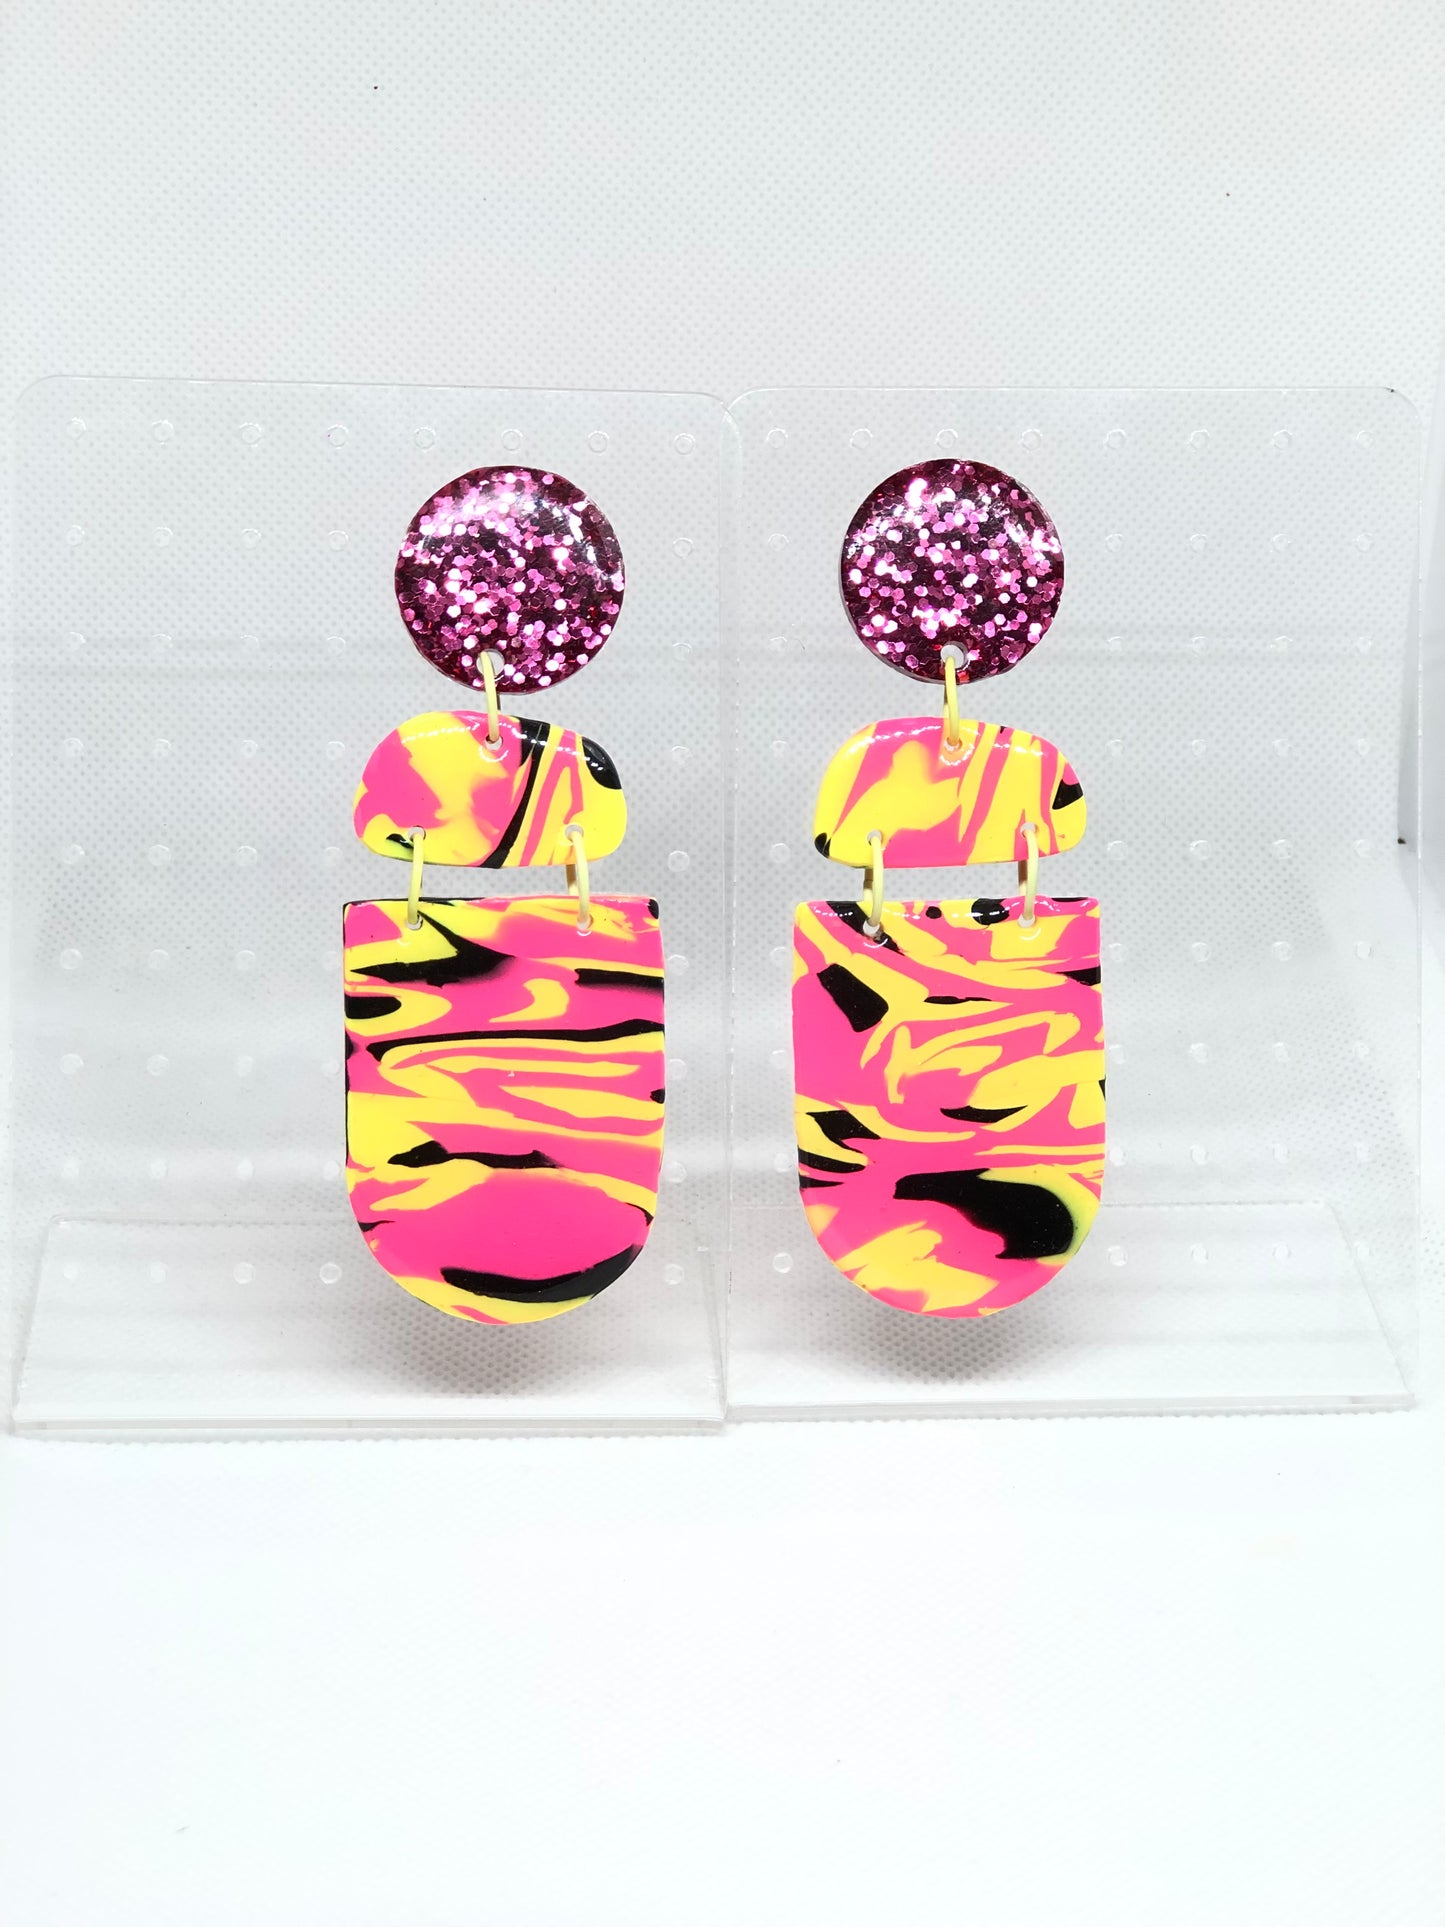 All About The Pink - Pink, Yellow & Black Stud Earrings - lightweight